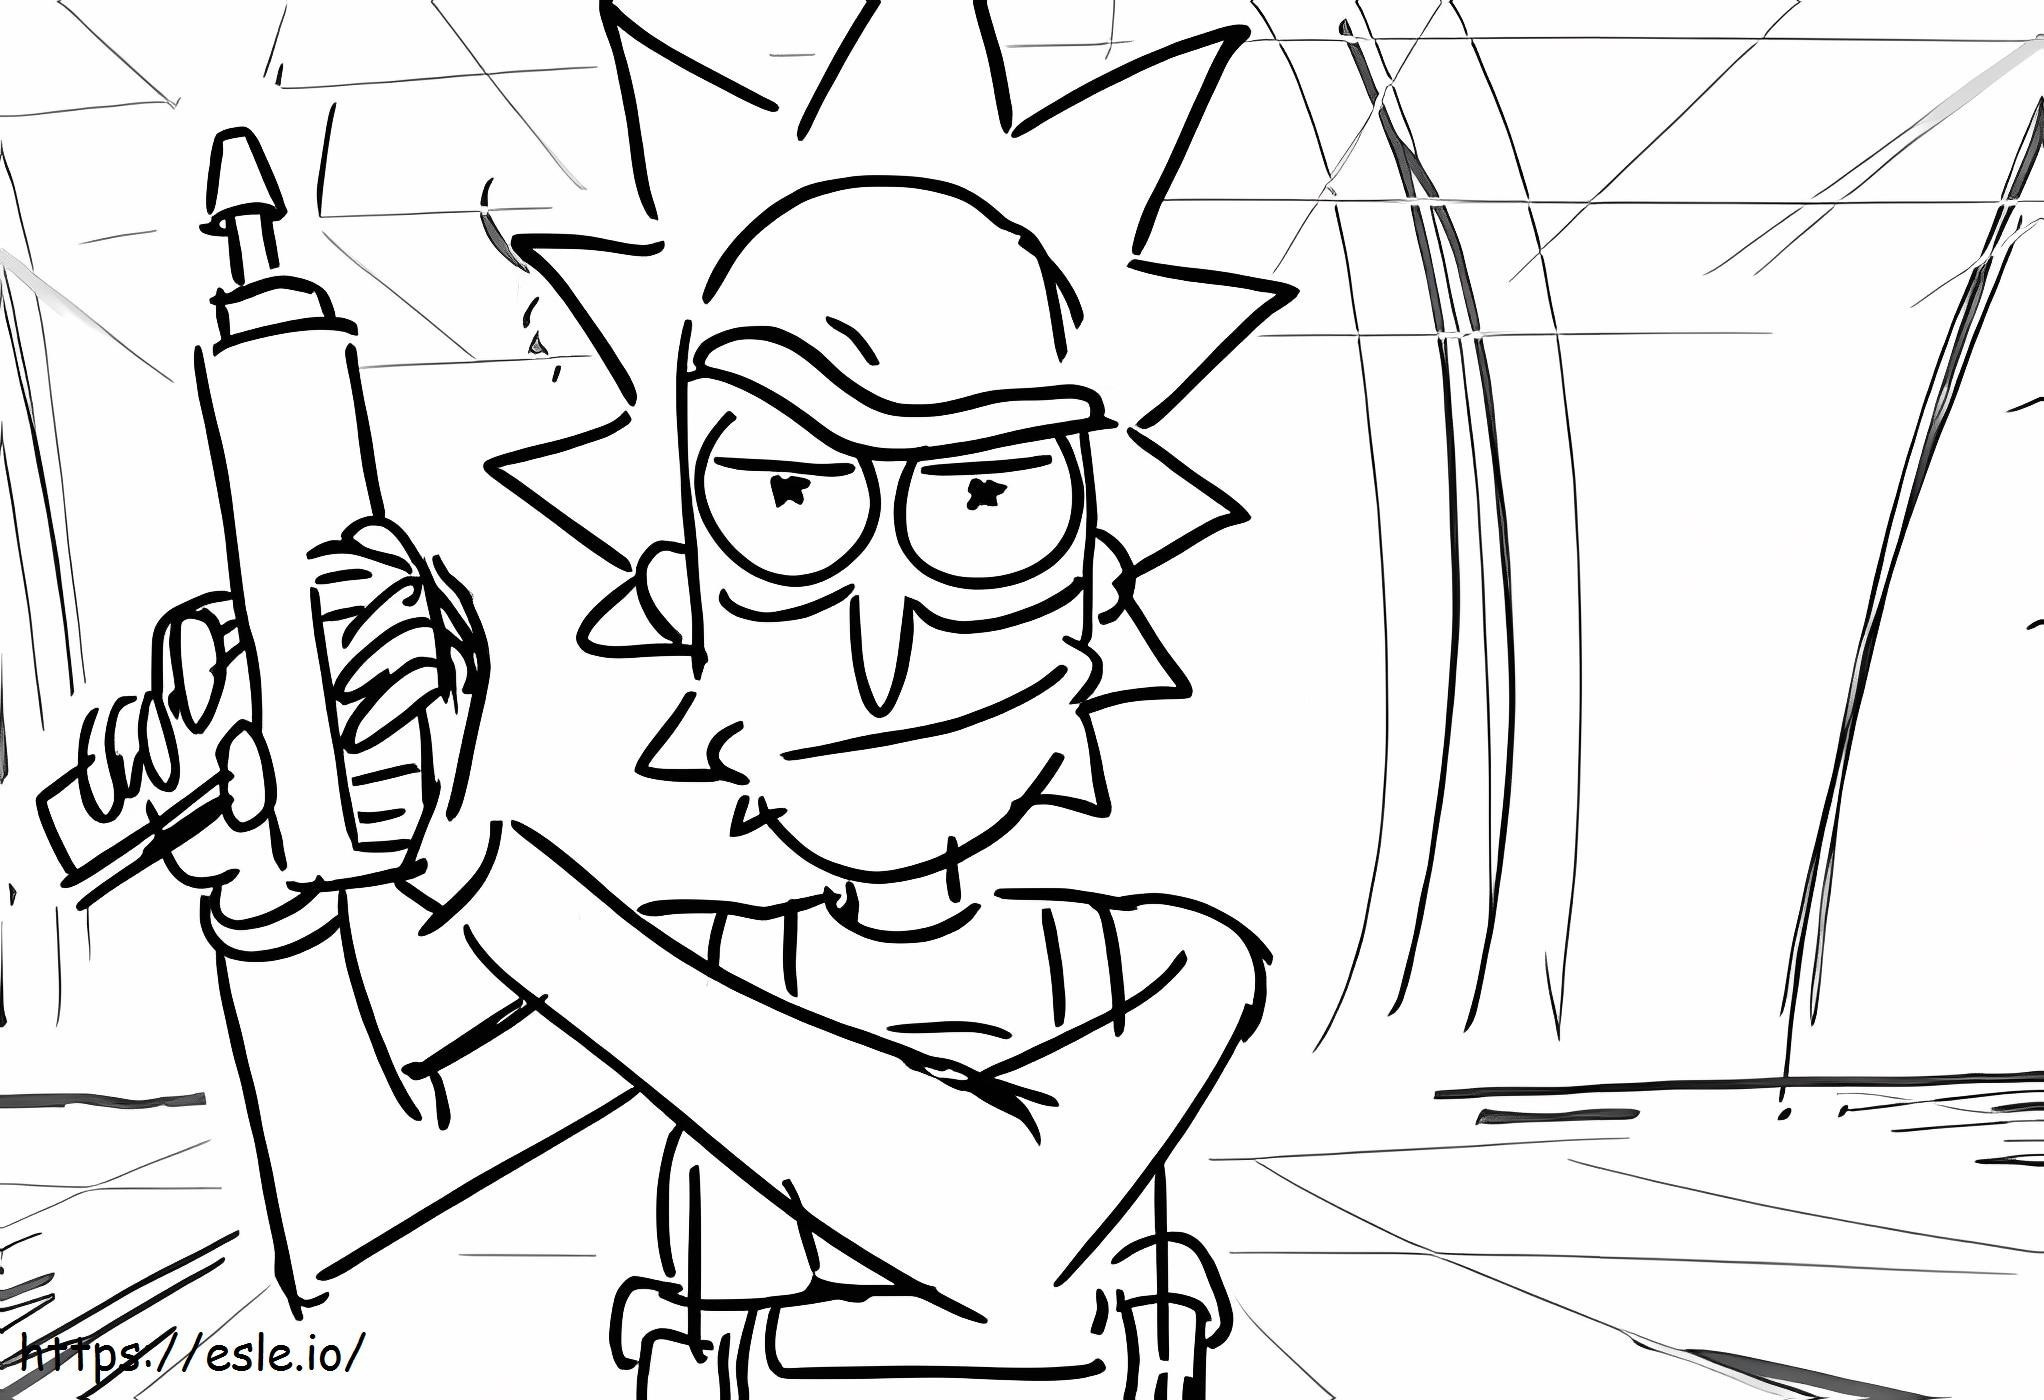 Rick With A Gun coloring page